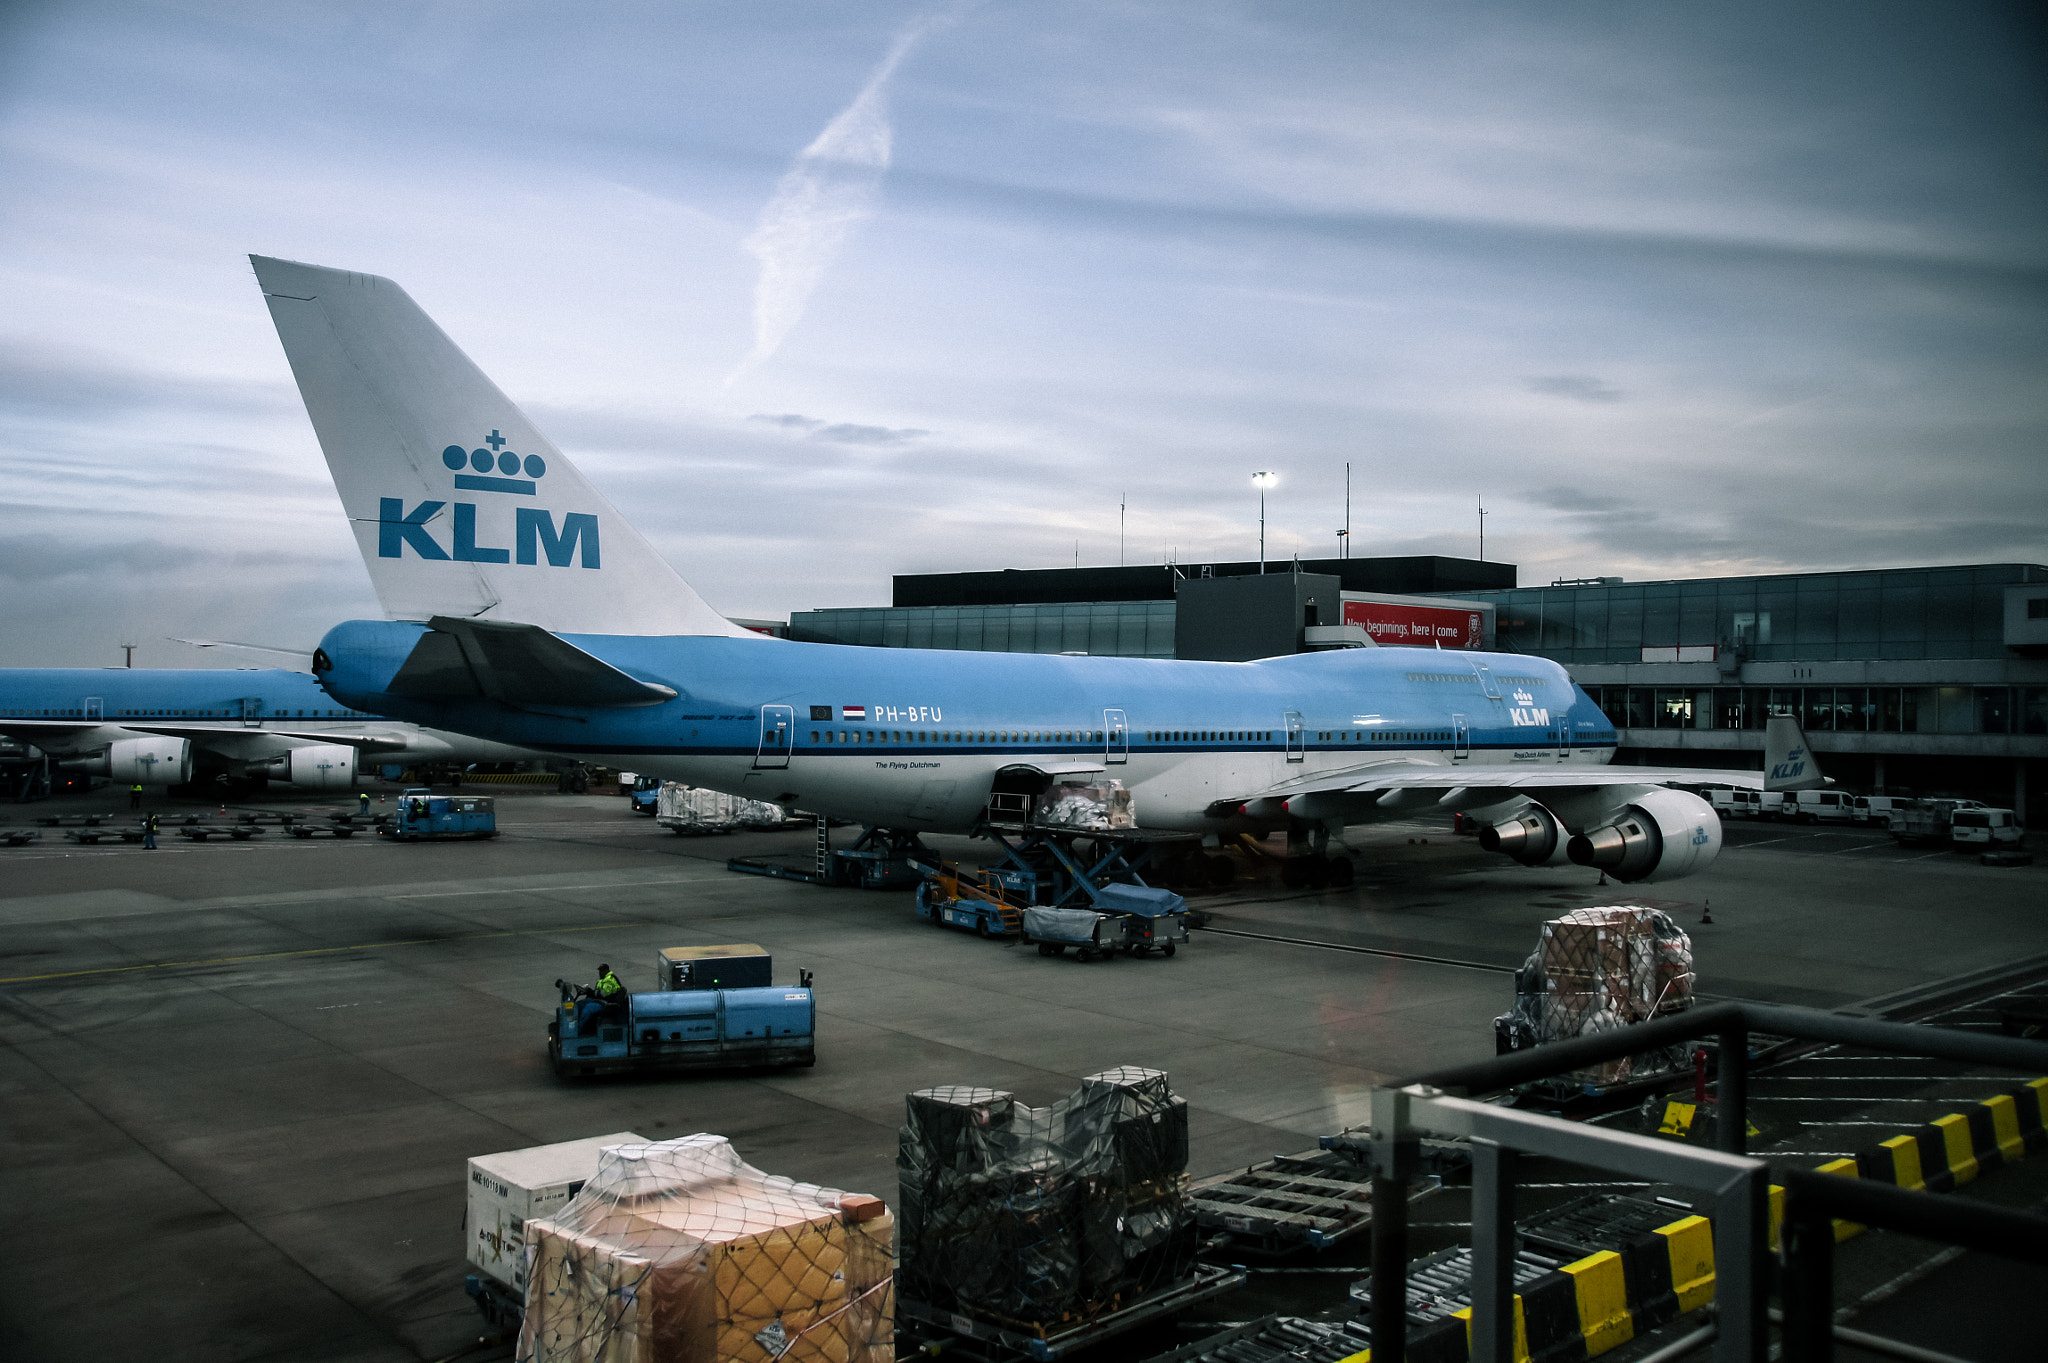 Sony SLT-A33 sample photo. Klm boeing at schipol airport photography